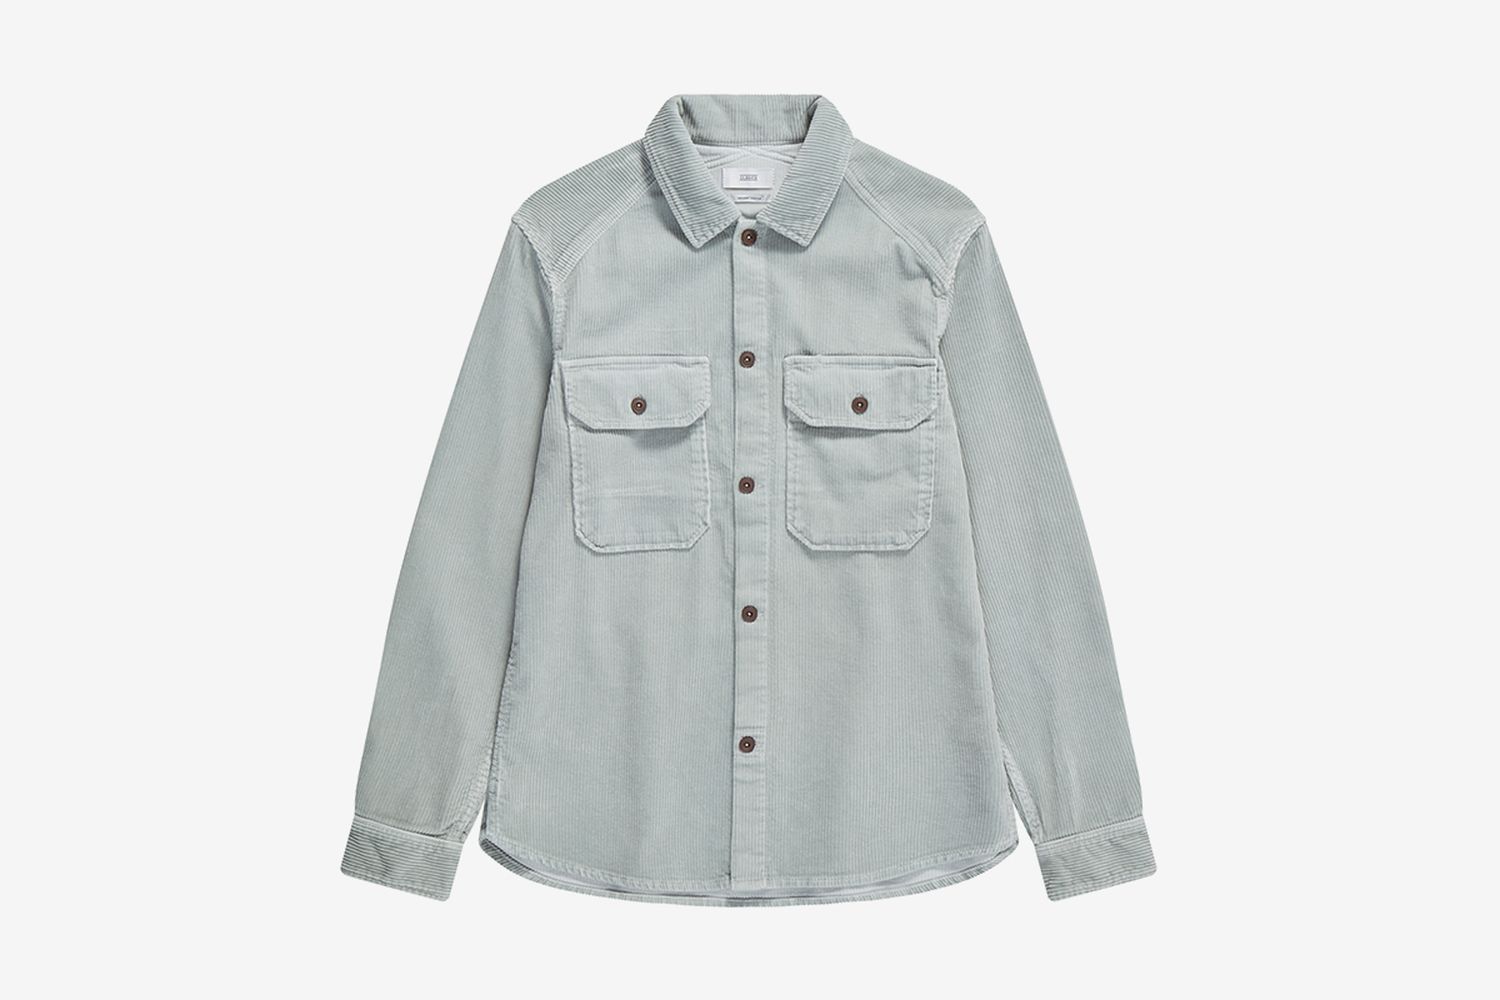 Army Overshirt Made Of Cord